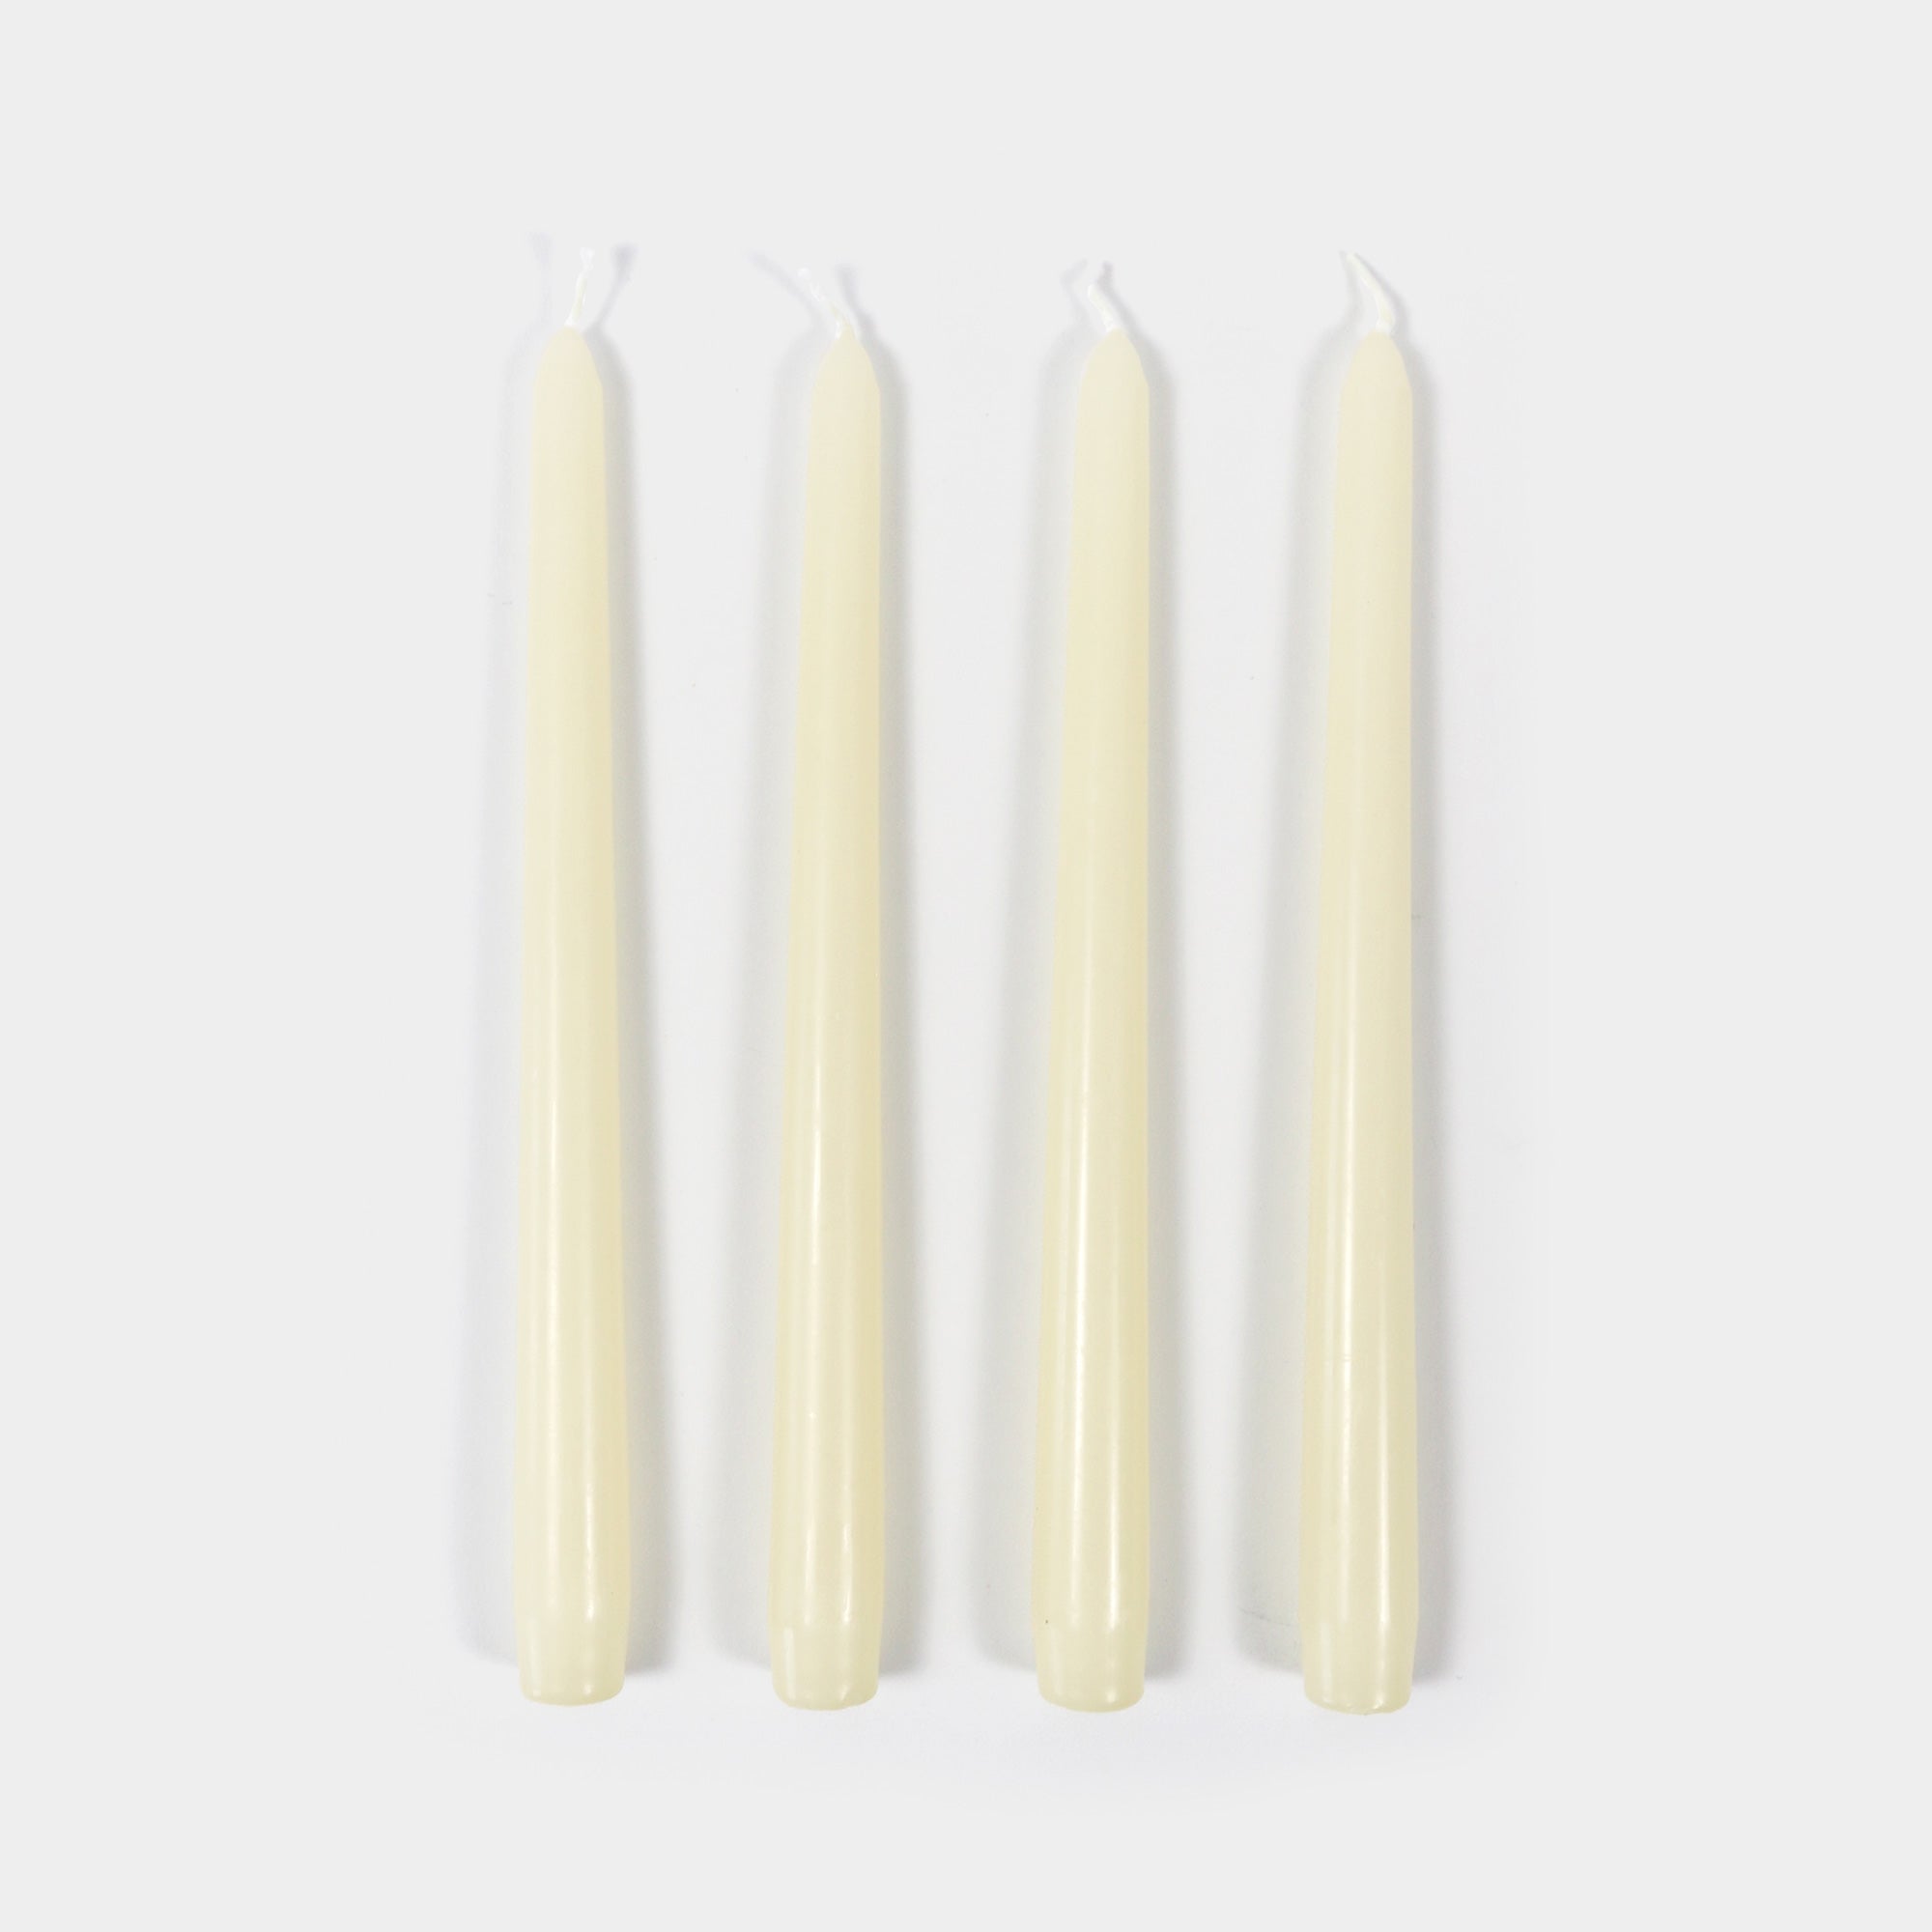 Taper Candles 4 Pack - Cream